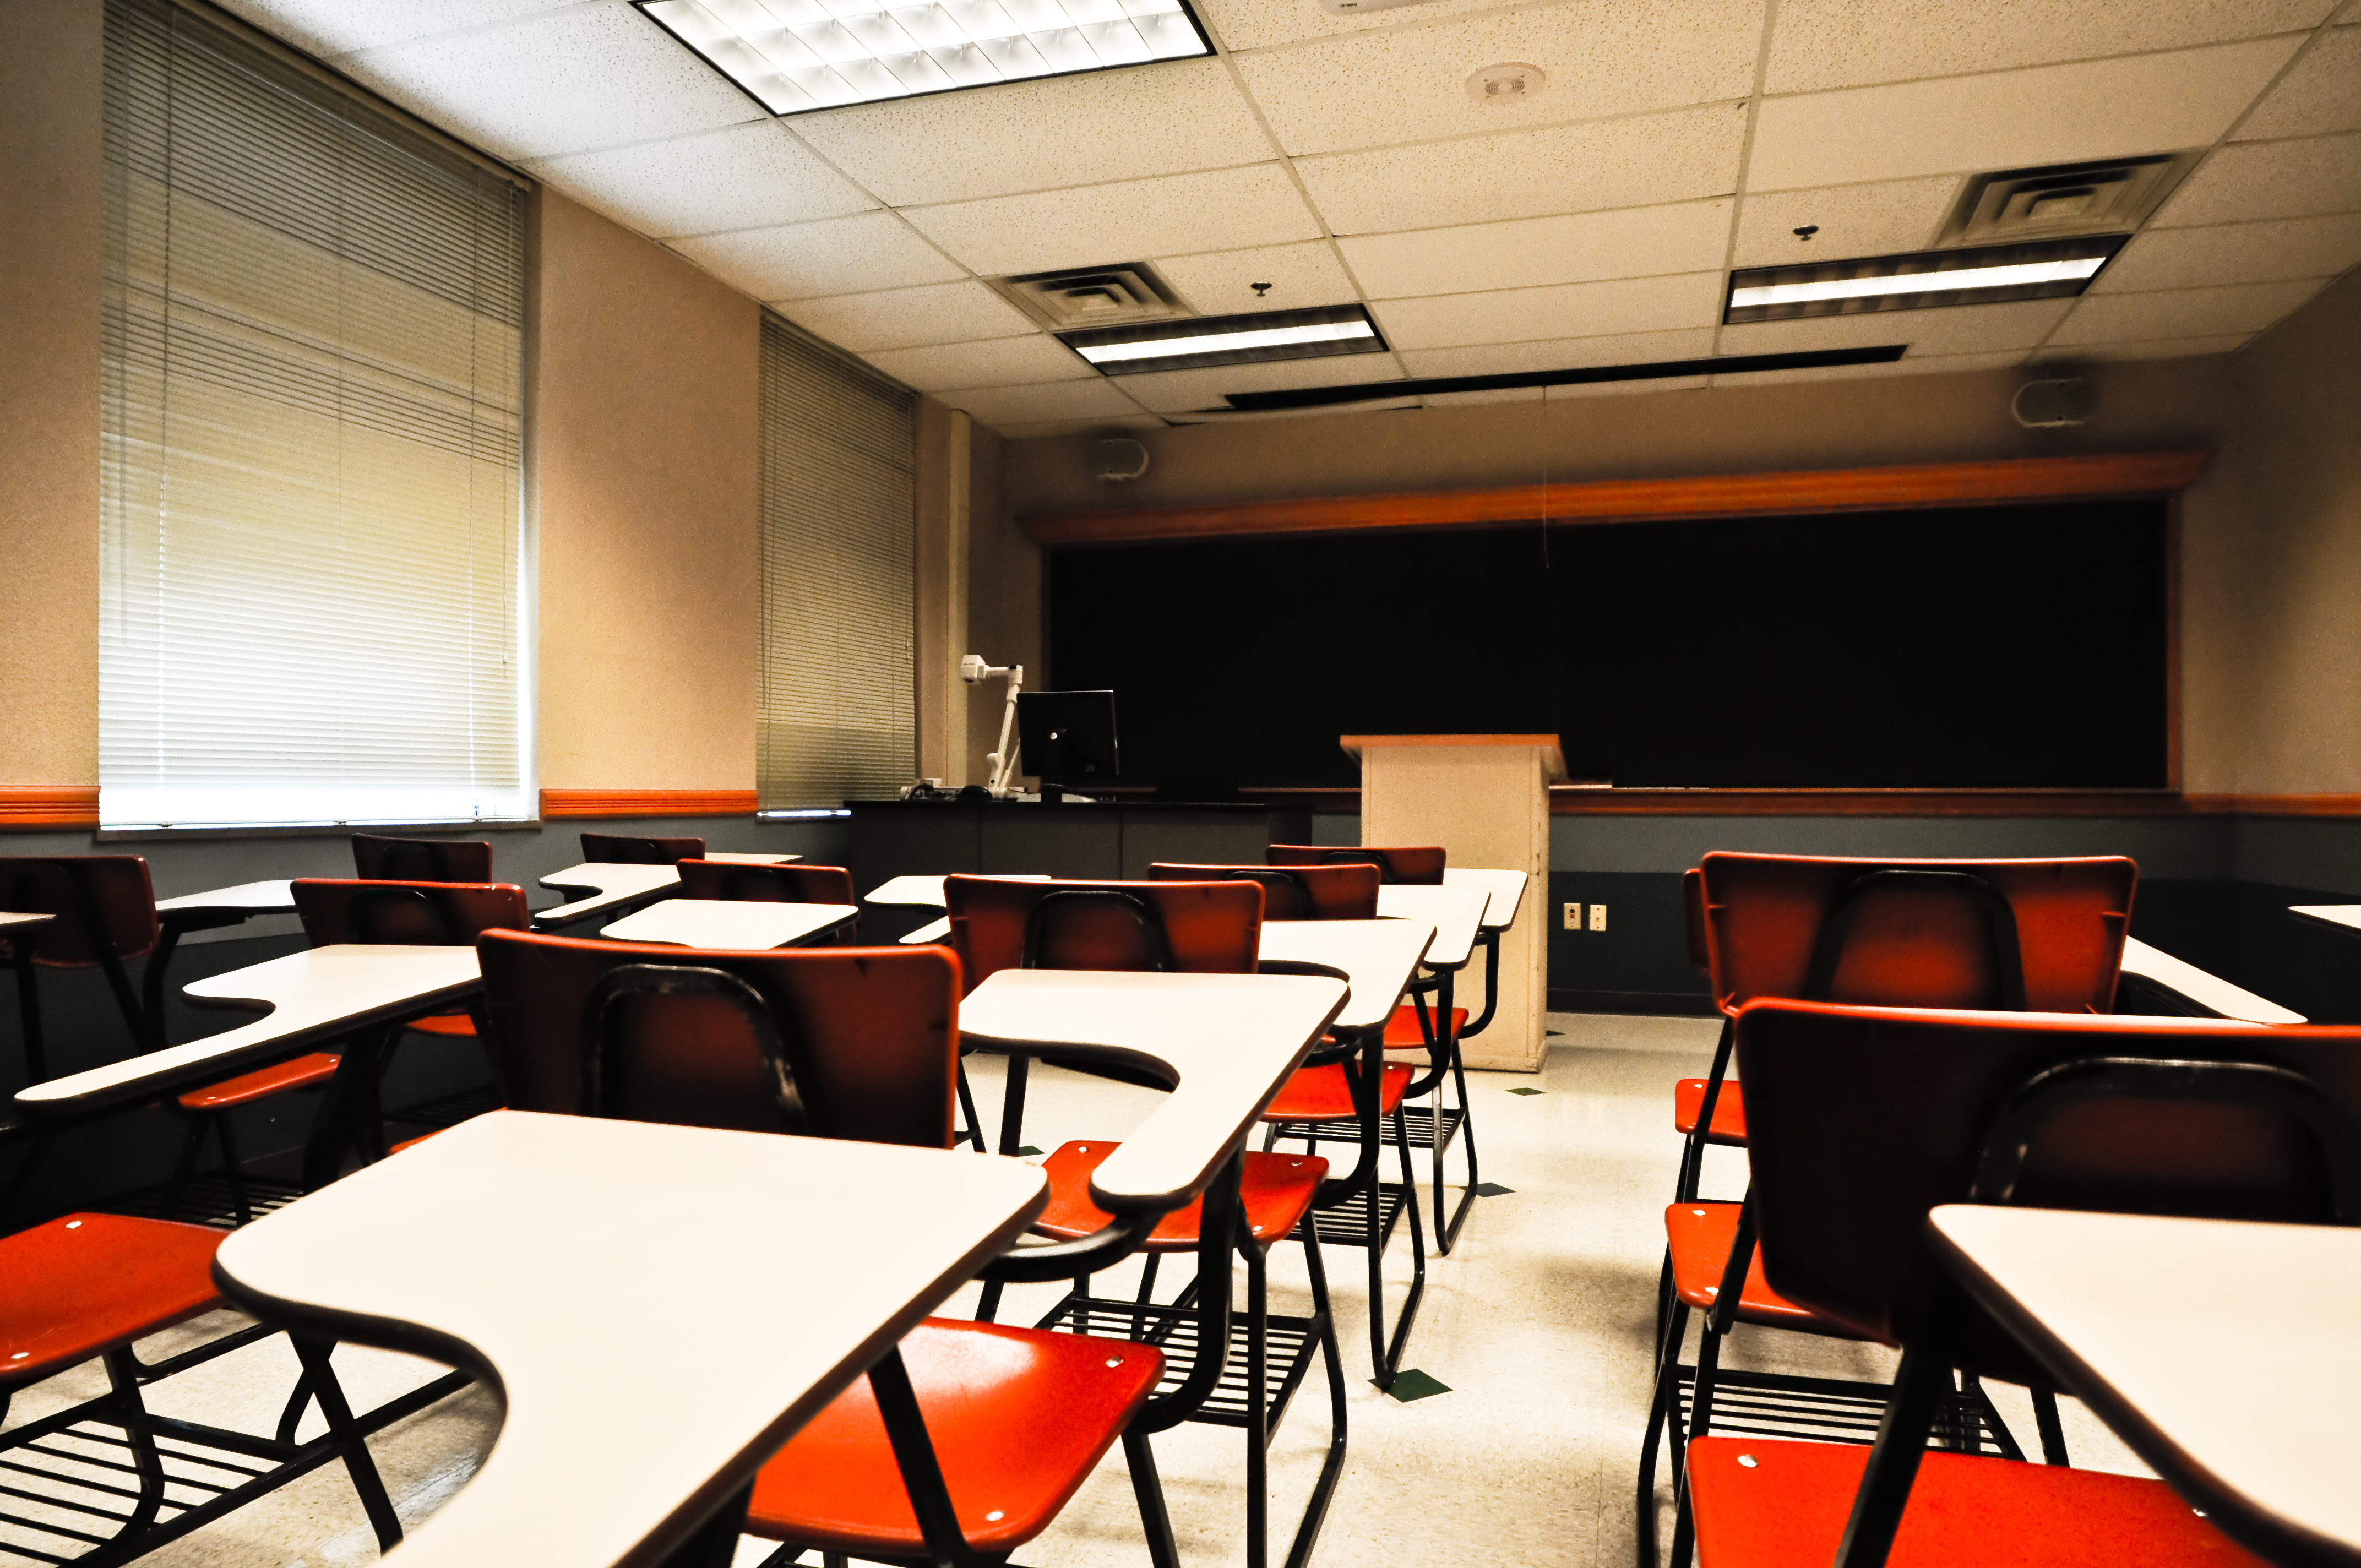 An empty classroom. The image is taken from the back and shows a blackboard and podium at the front and several rows of white desks with red metal chairs for students.